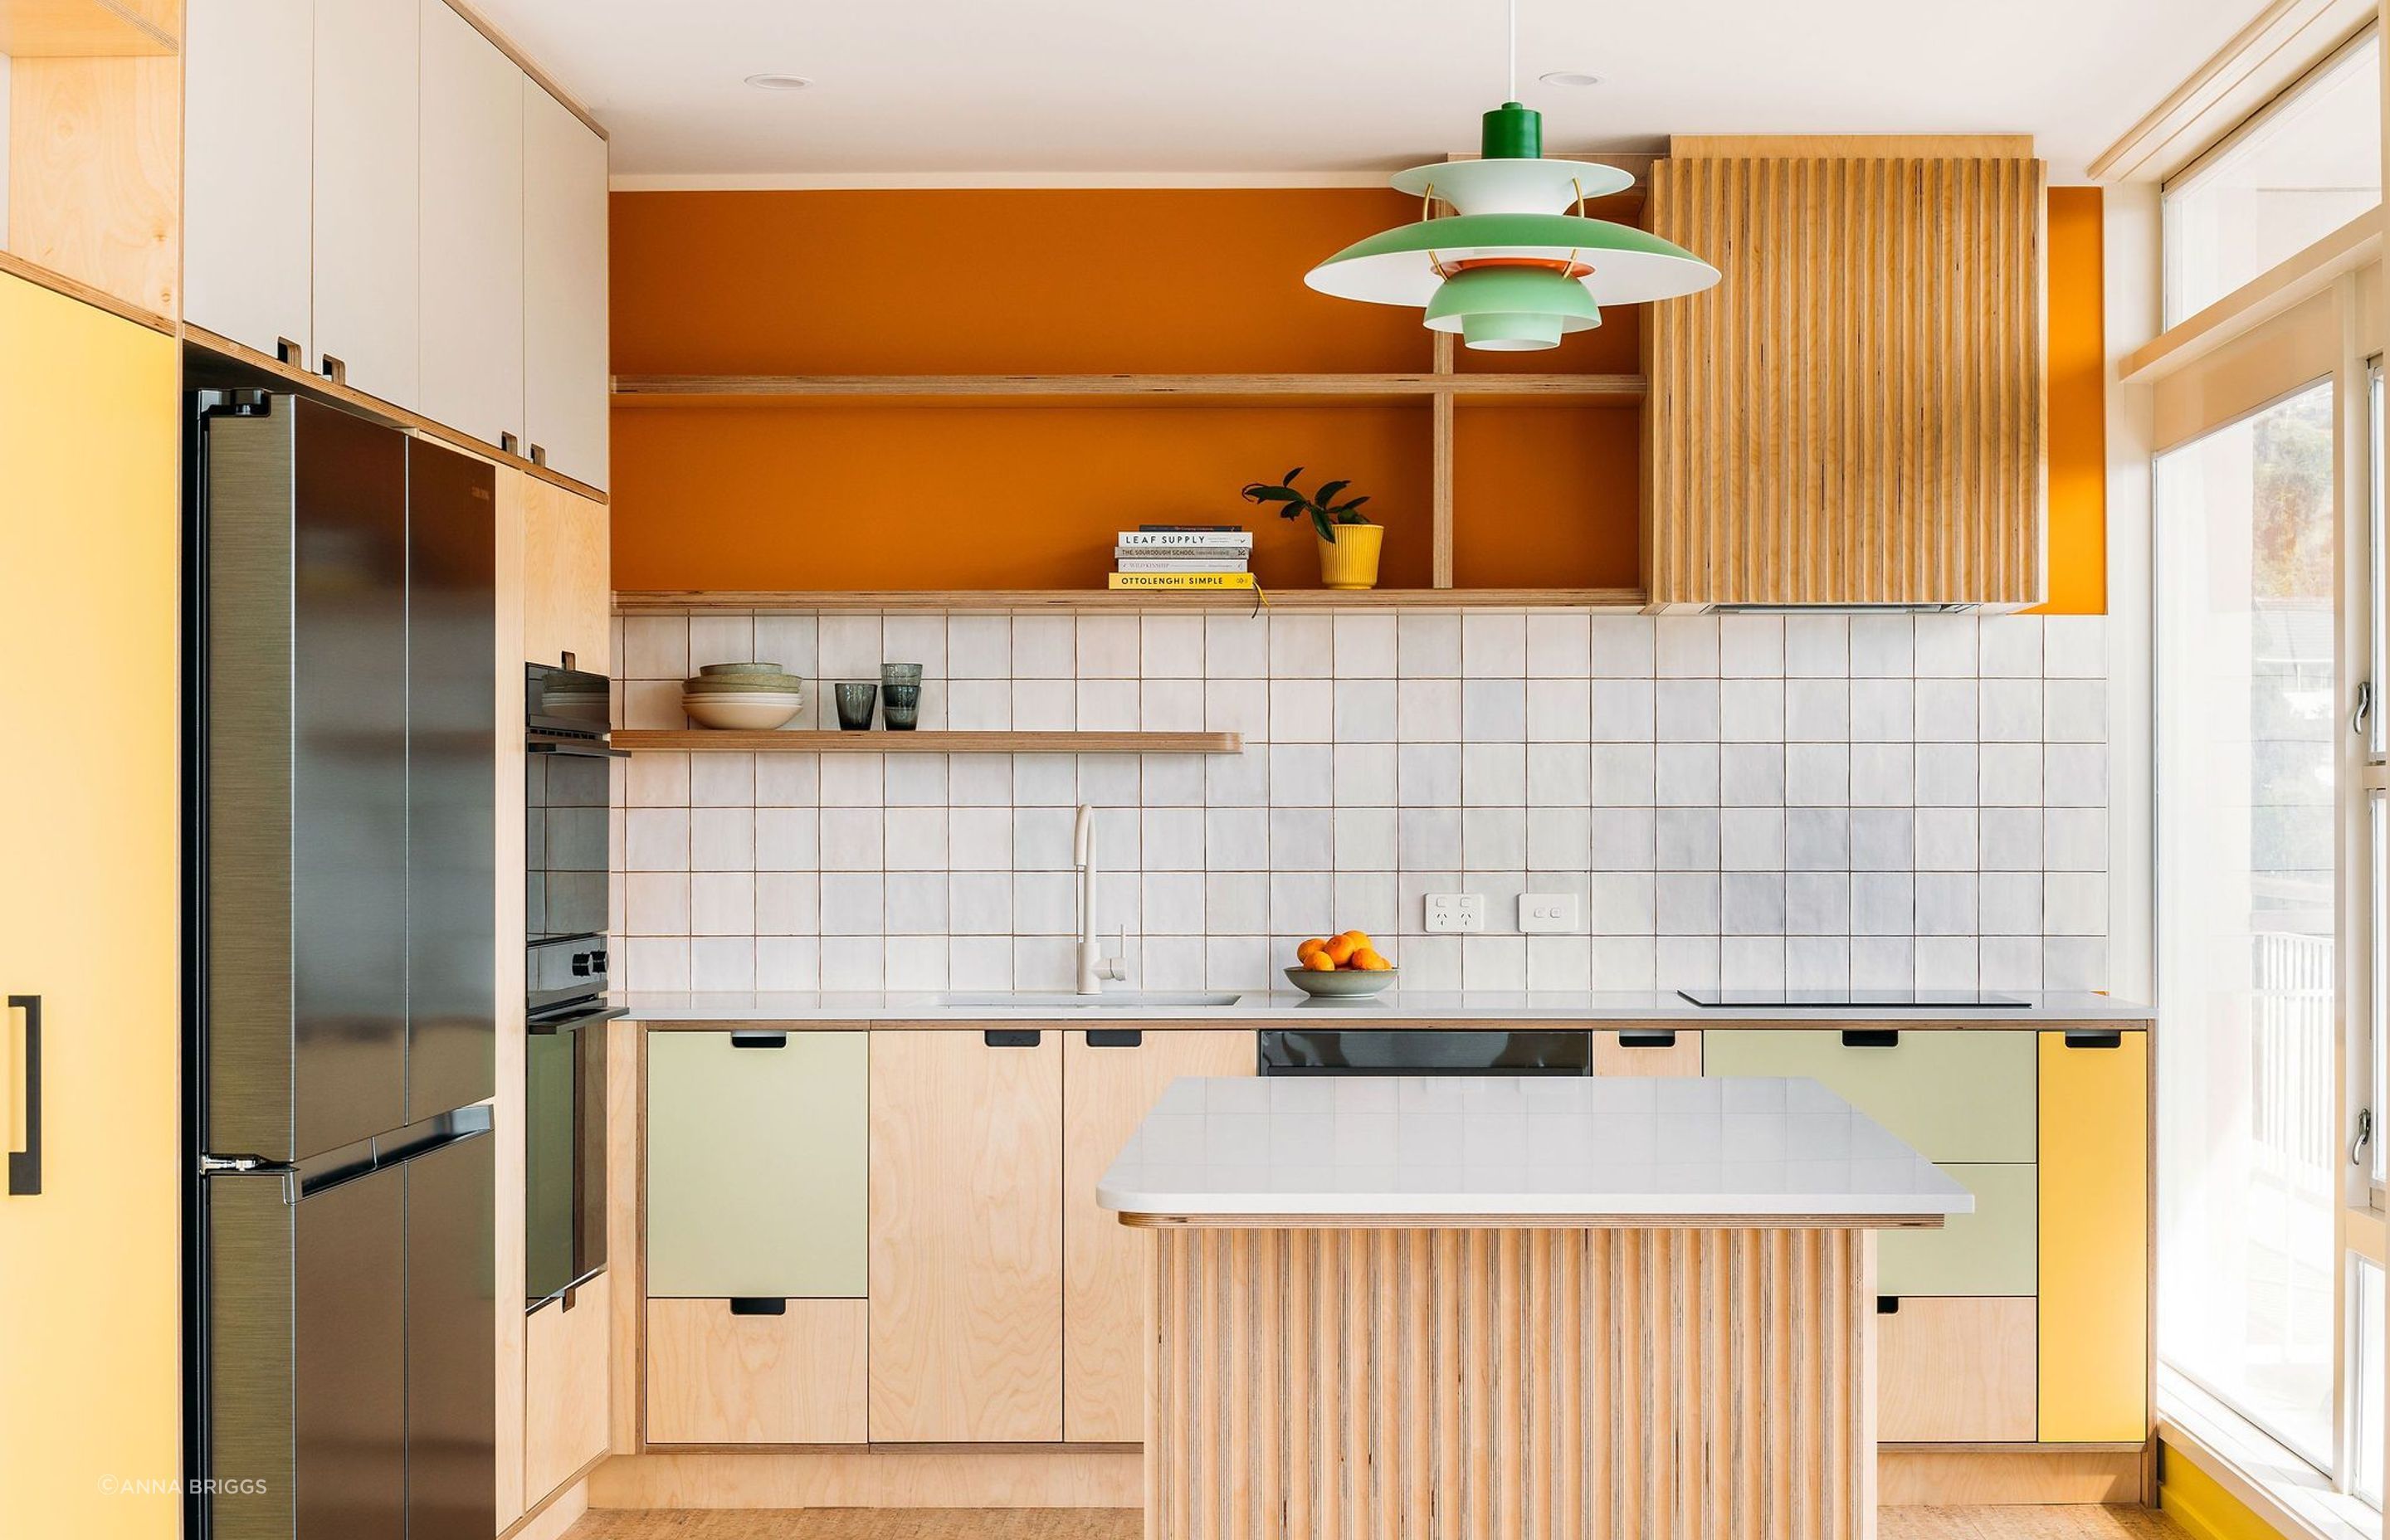 A practical kitchen design, with lots of storage in the apartment setting.